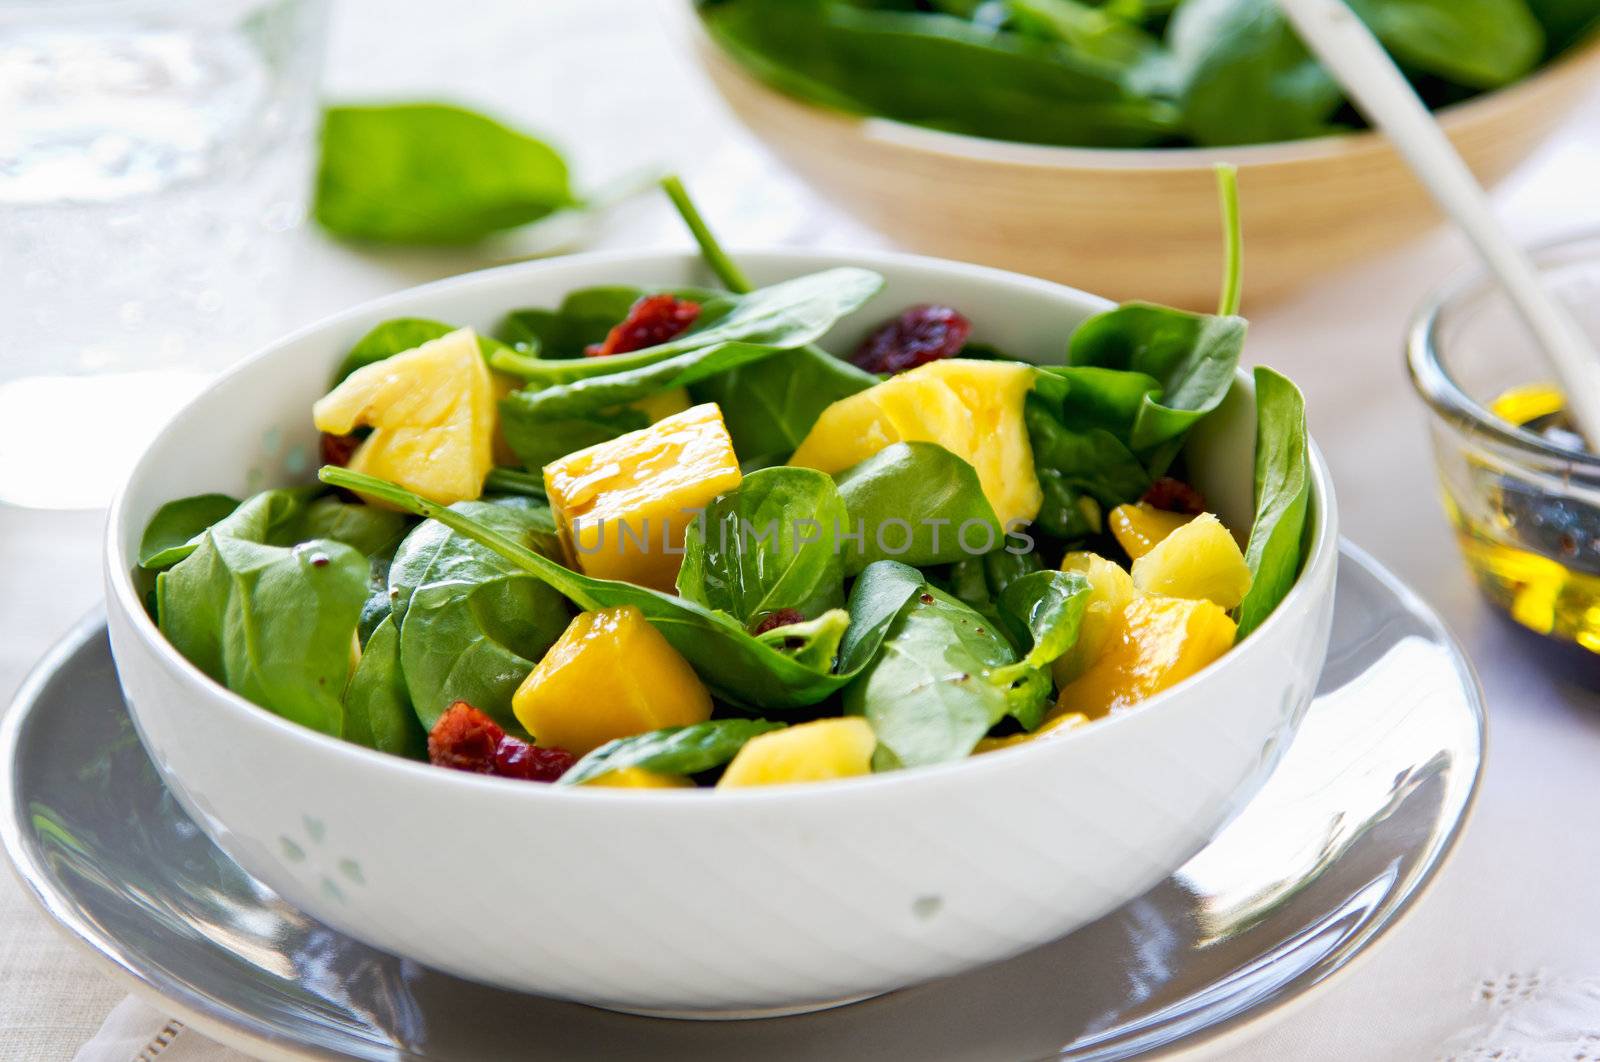 Mango and Pineapple with Spinach salad by vanillaechoes